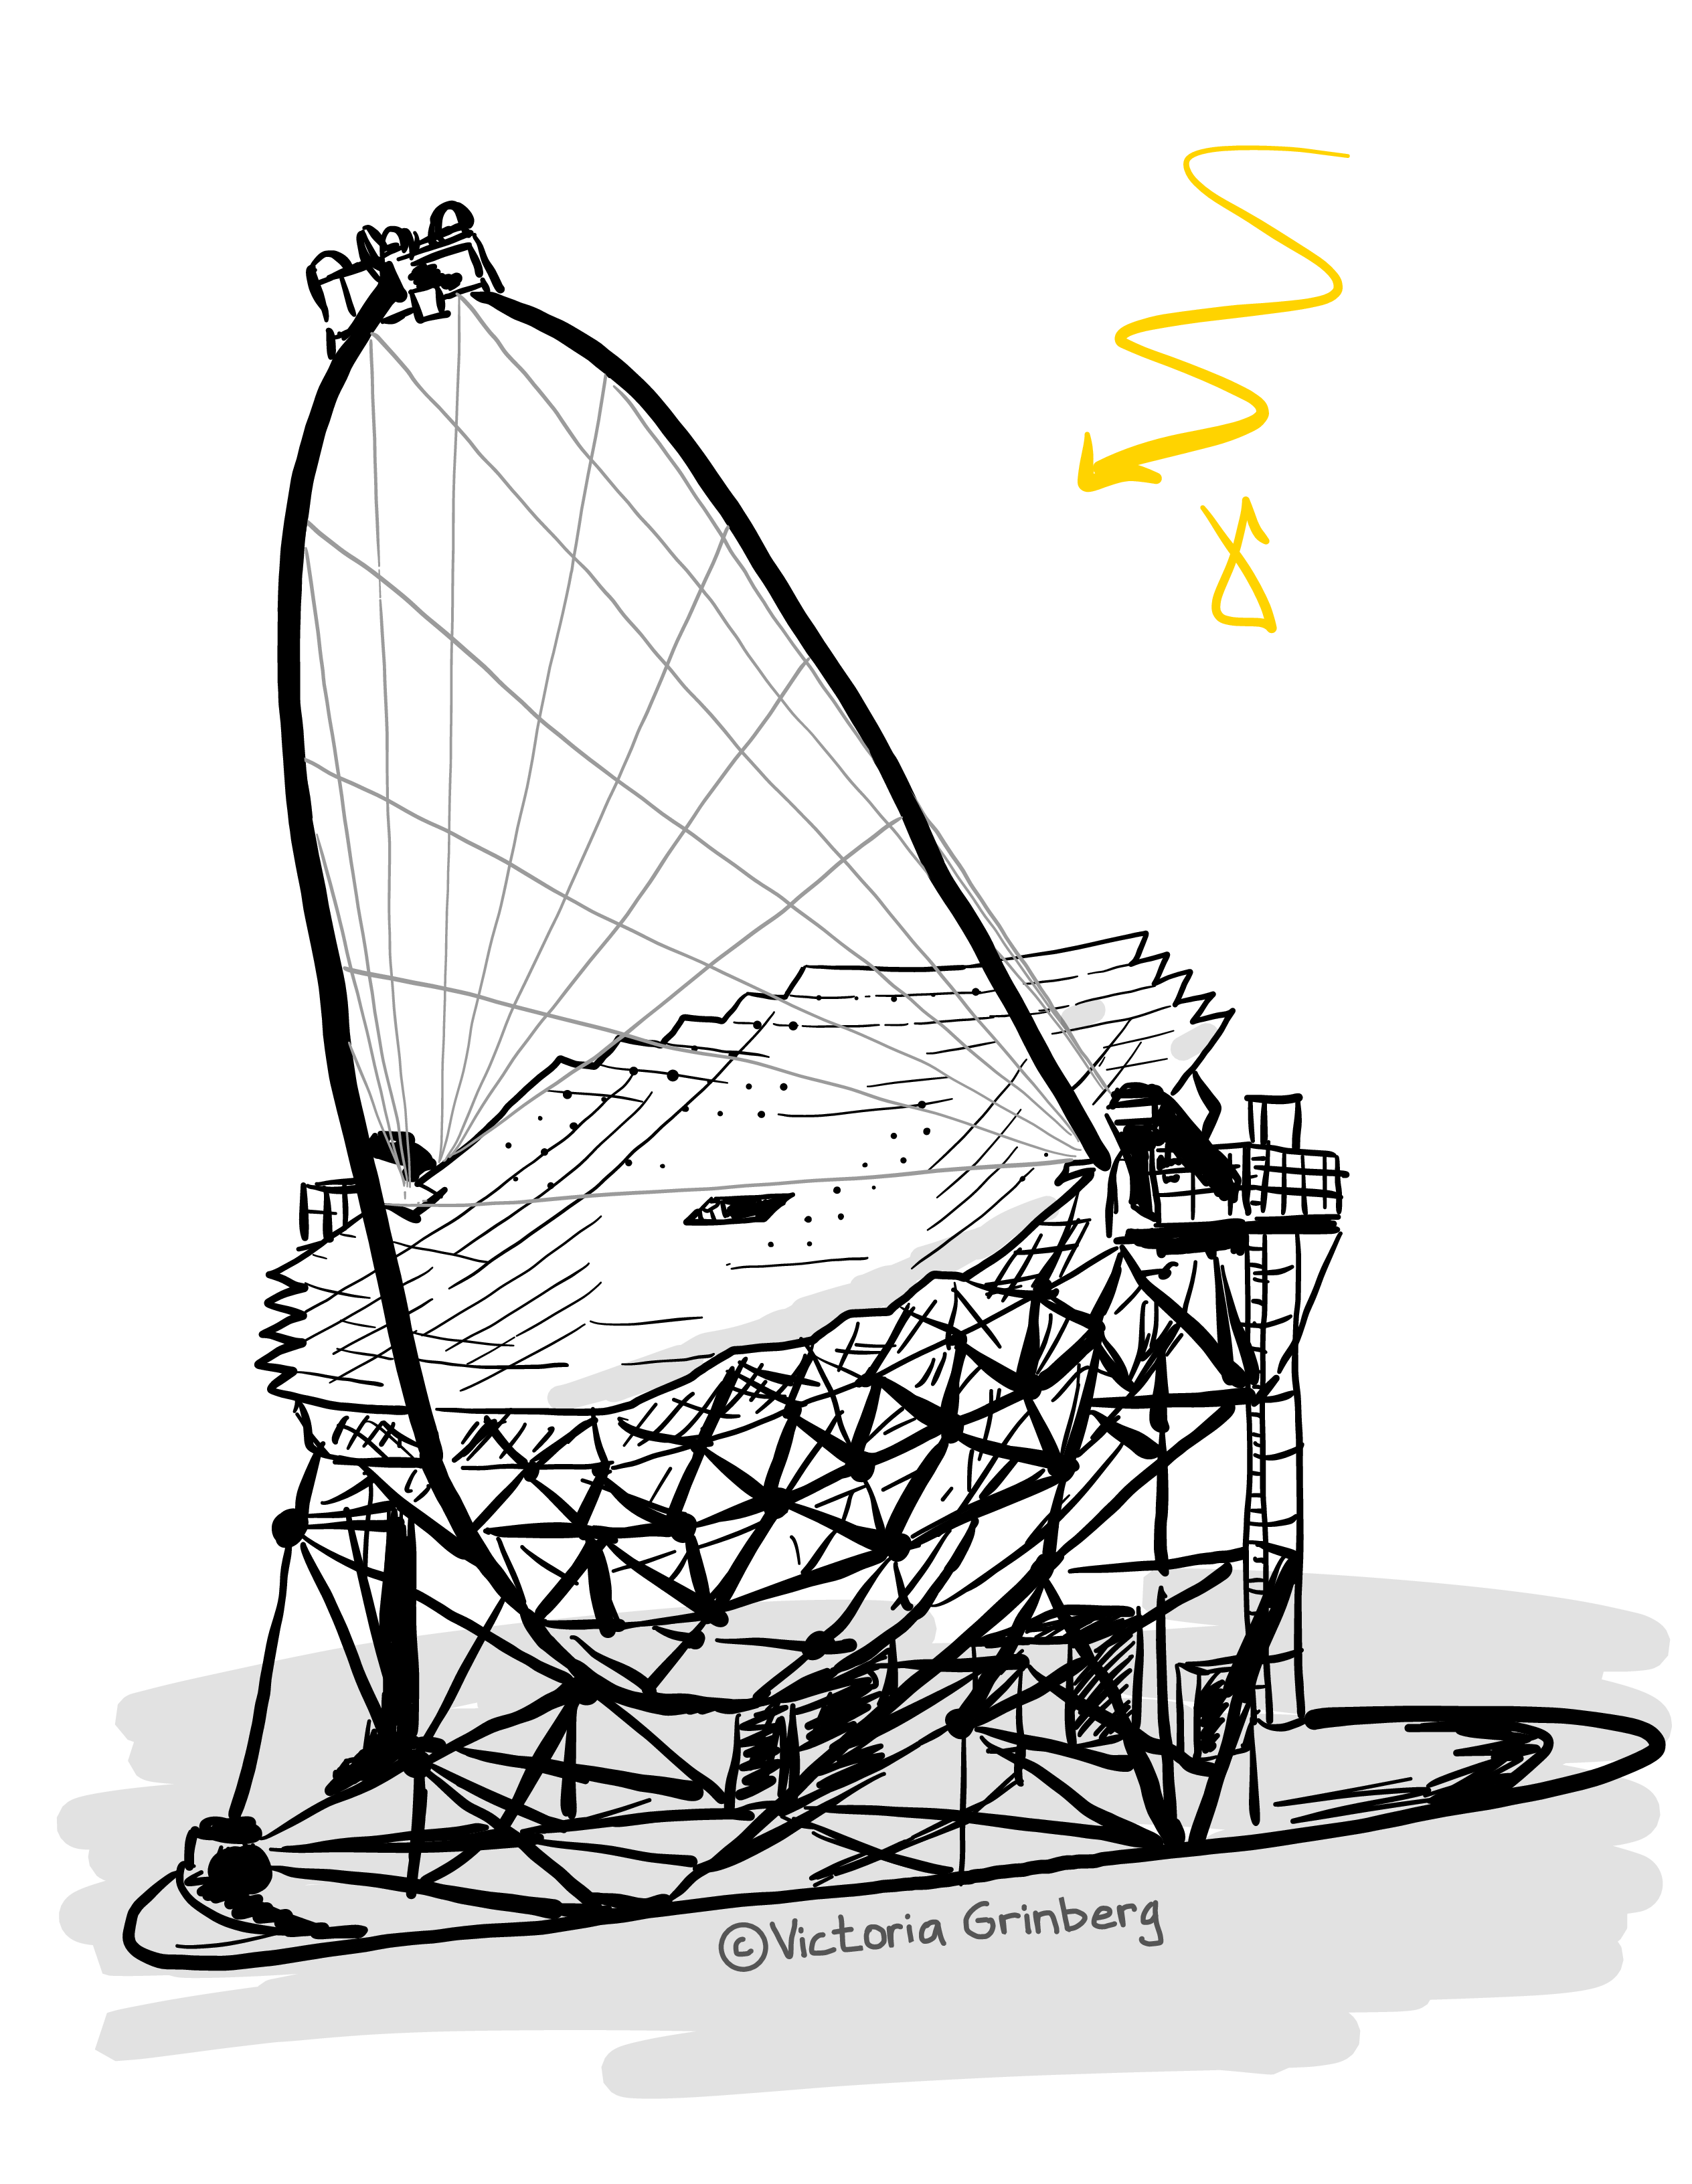 Black and white dighital drawing of the MAGIC telescope.